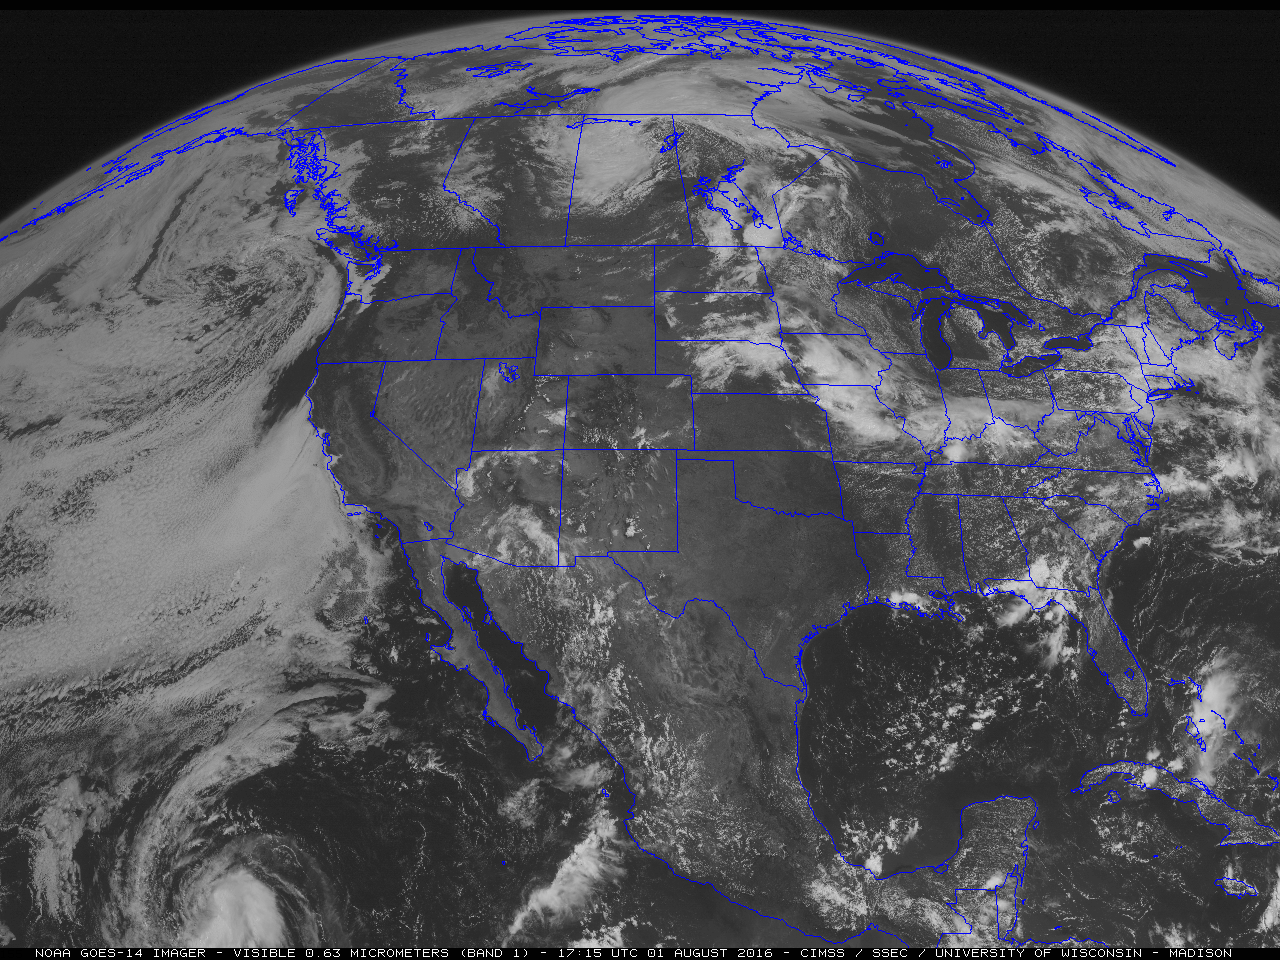 GOES-14 Visible (0.63 um) images [click to play animation]